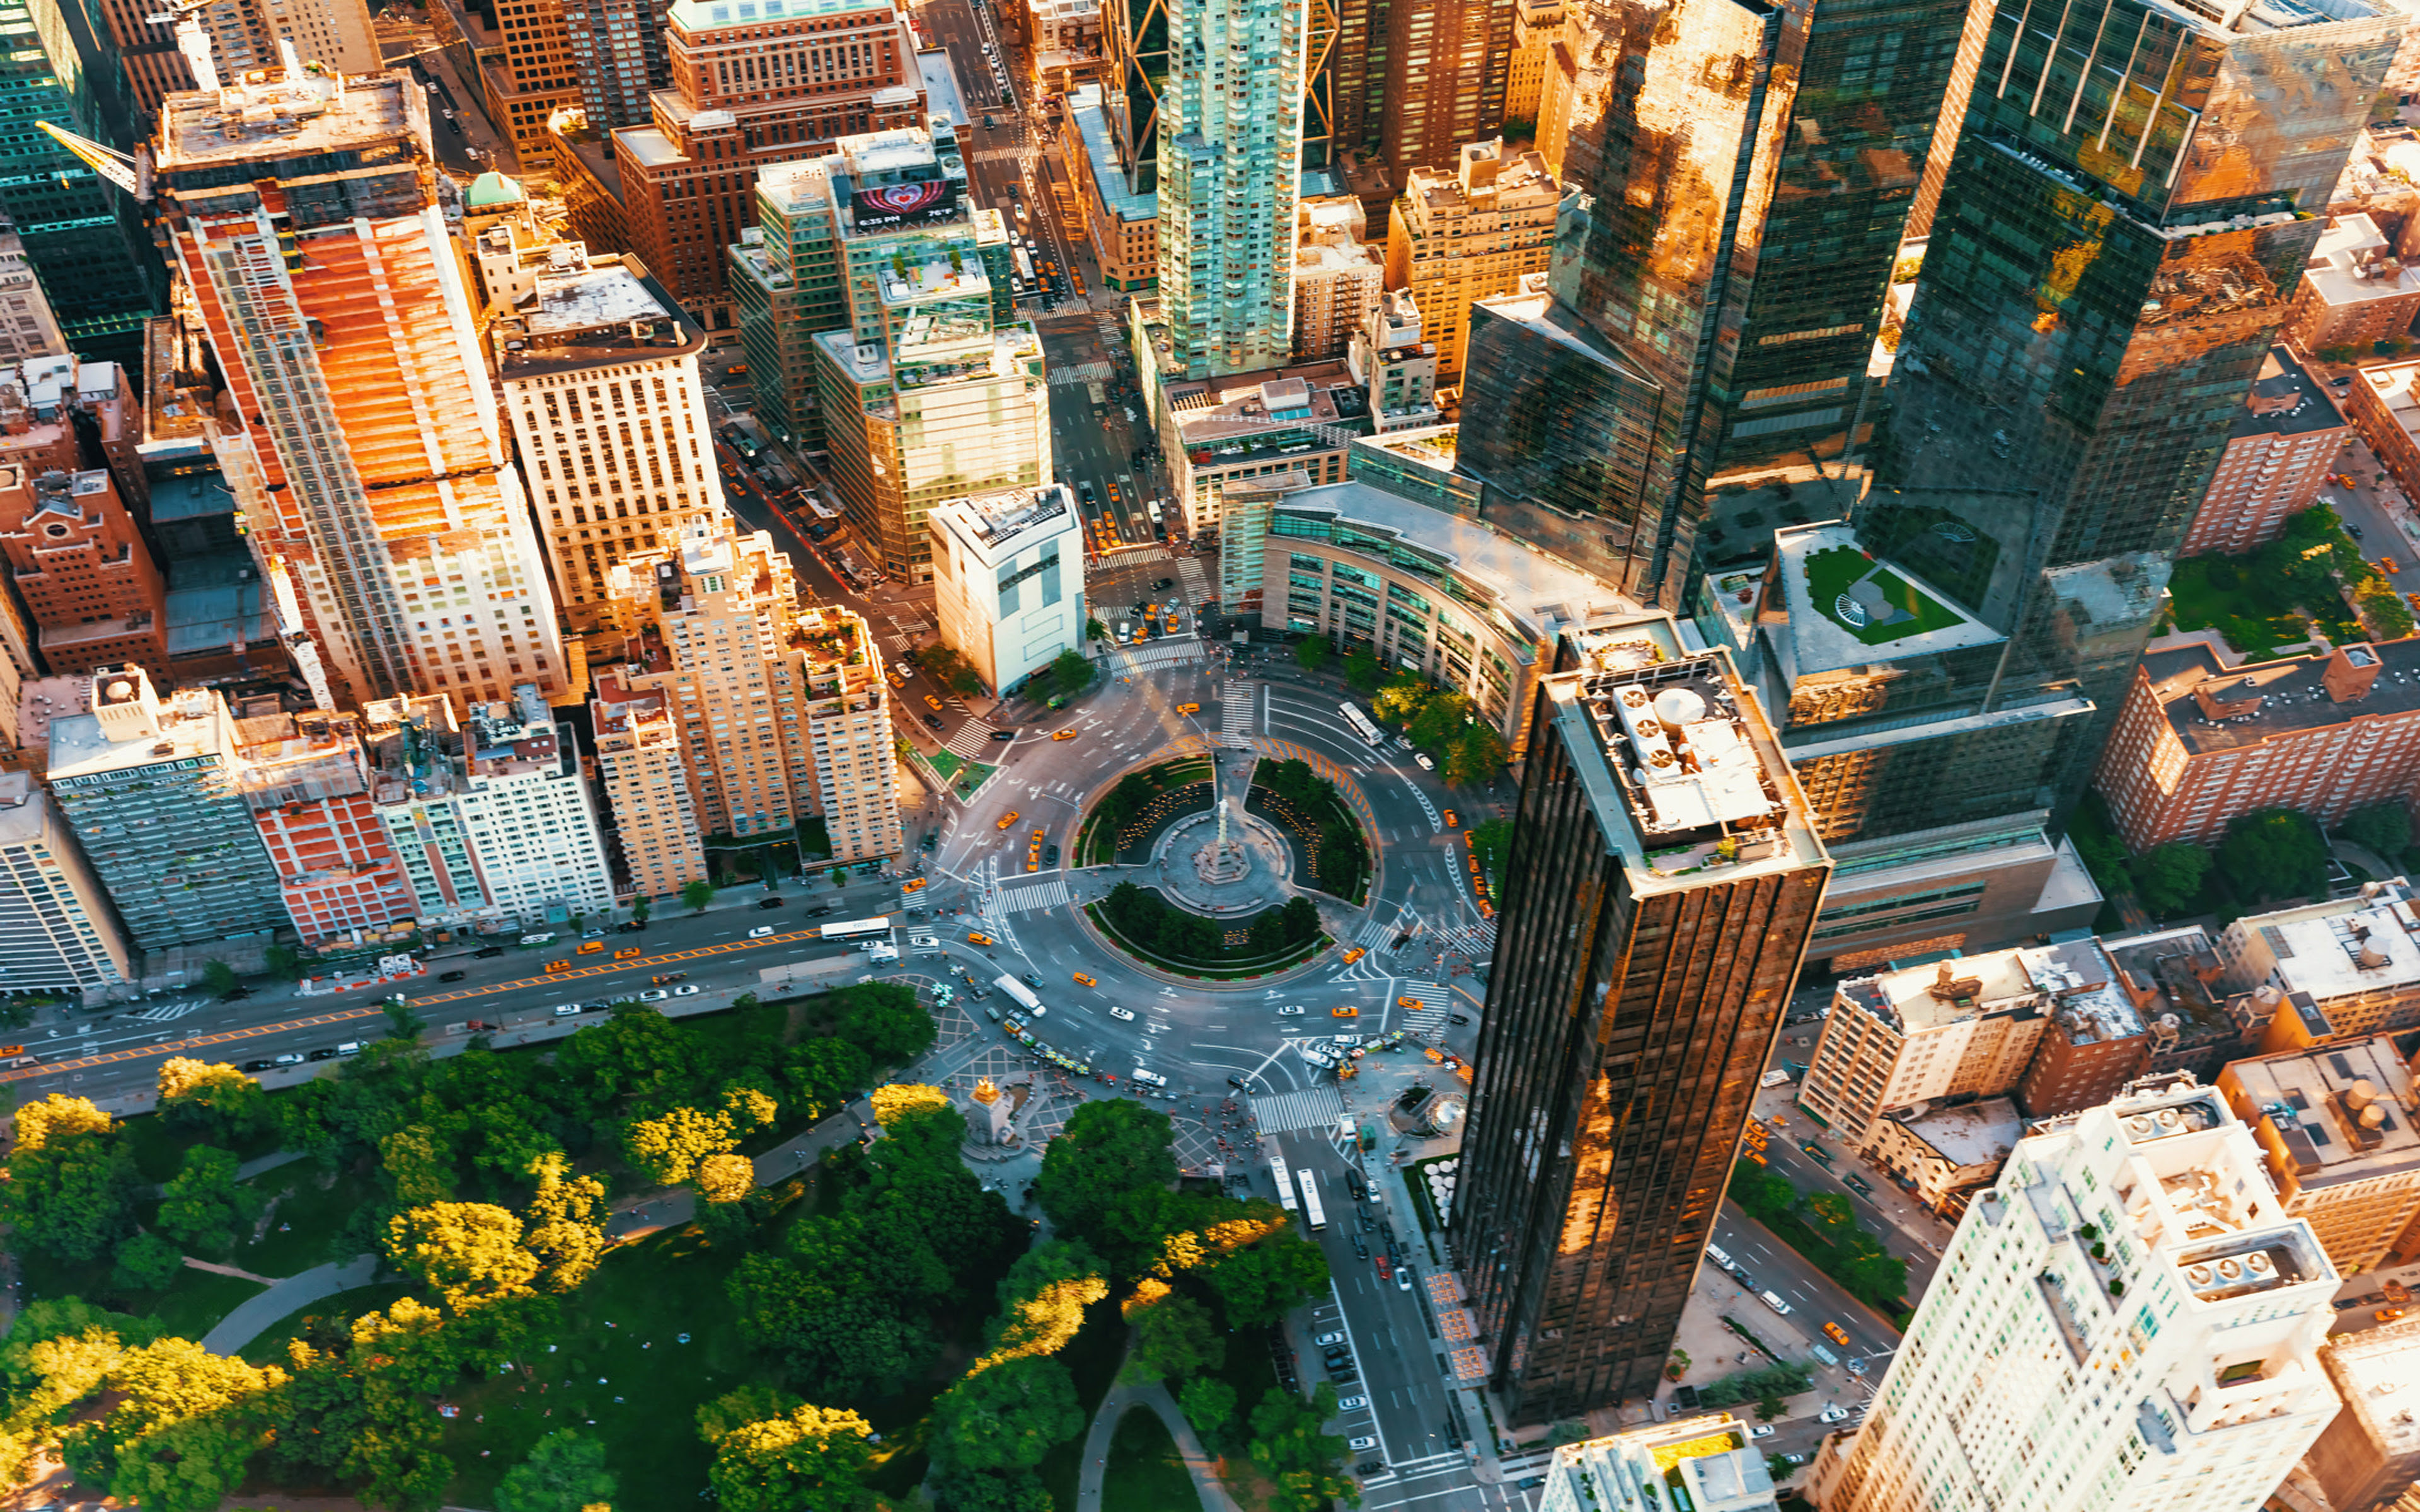 Columbus Circle In New York City Aerial View 4k Ultra Hd Wallpaper For